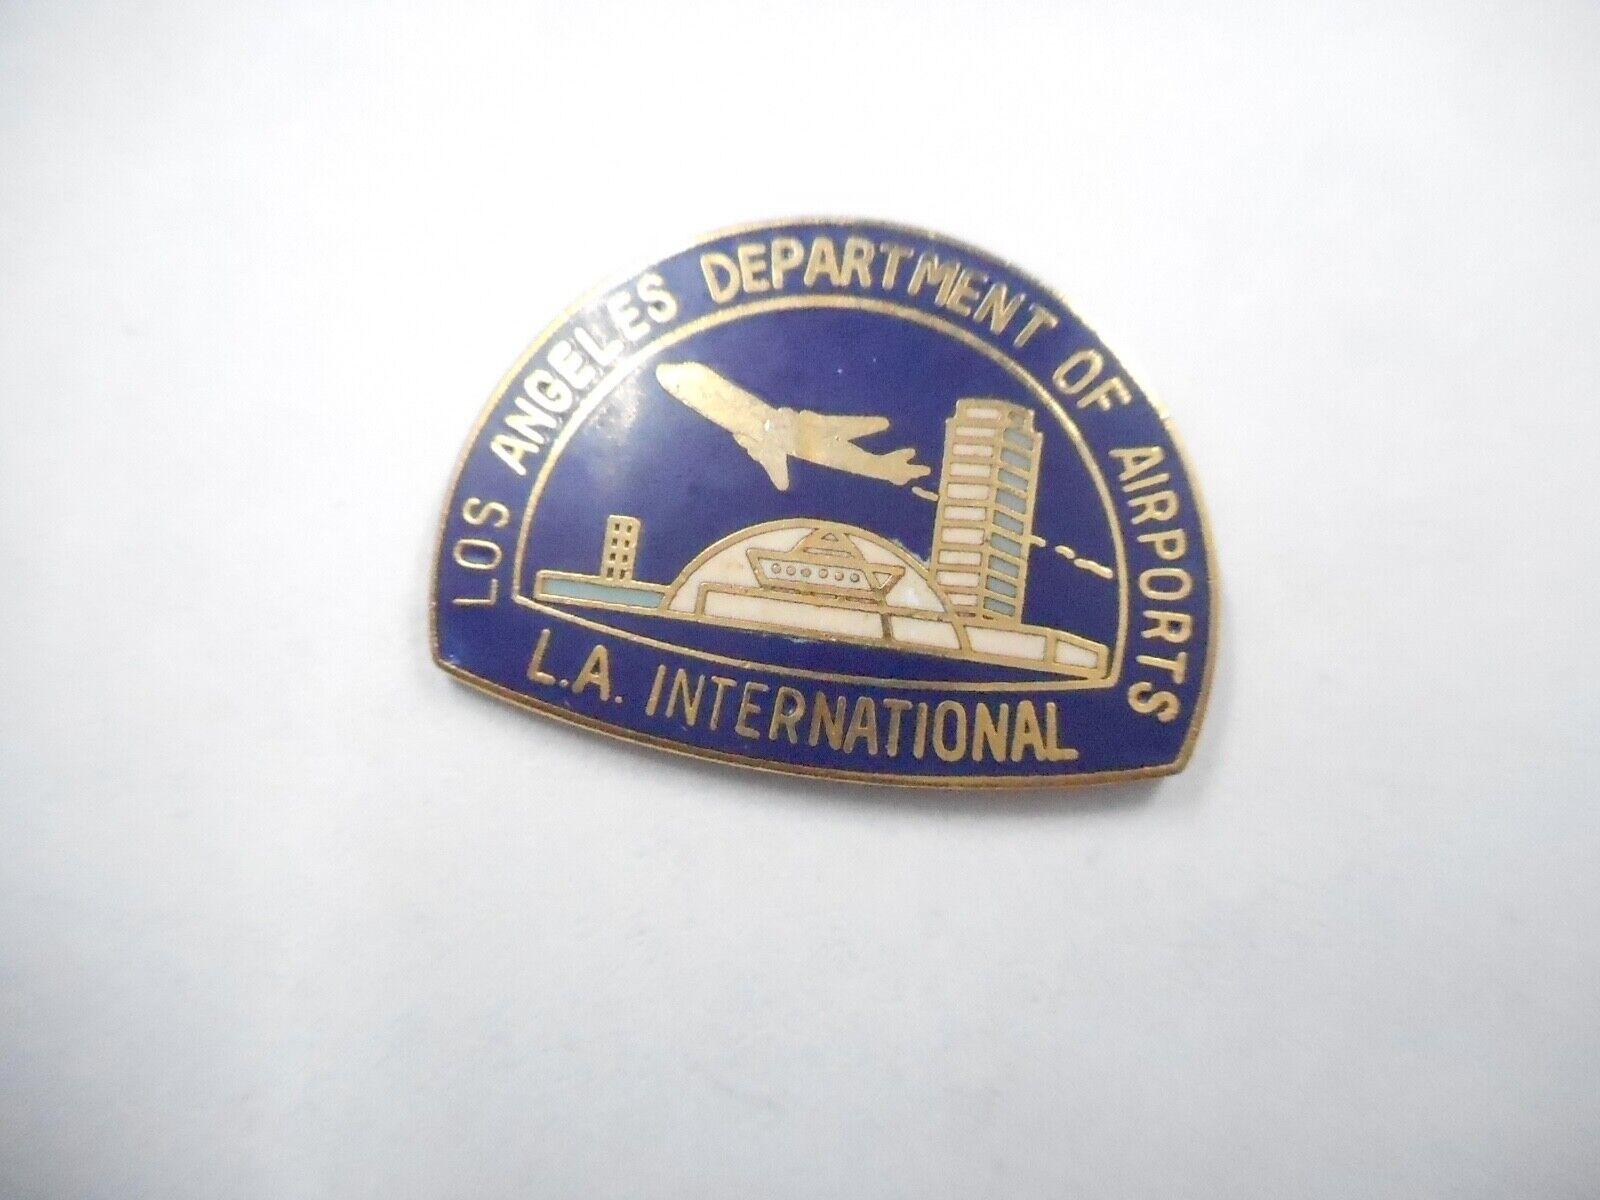 LOS ANGELES DEPT OF AIRPORTS L.A. INTERNATIONAL LAPEL PIN